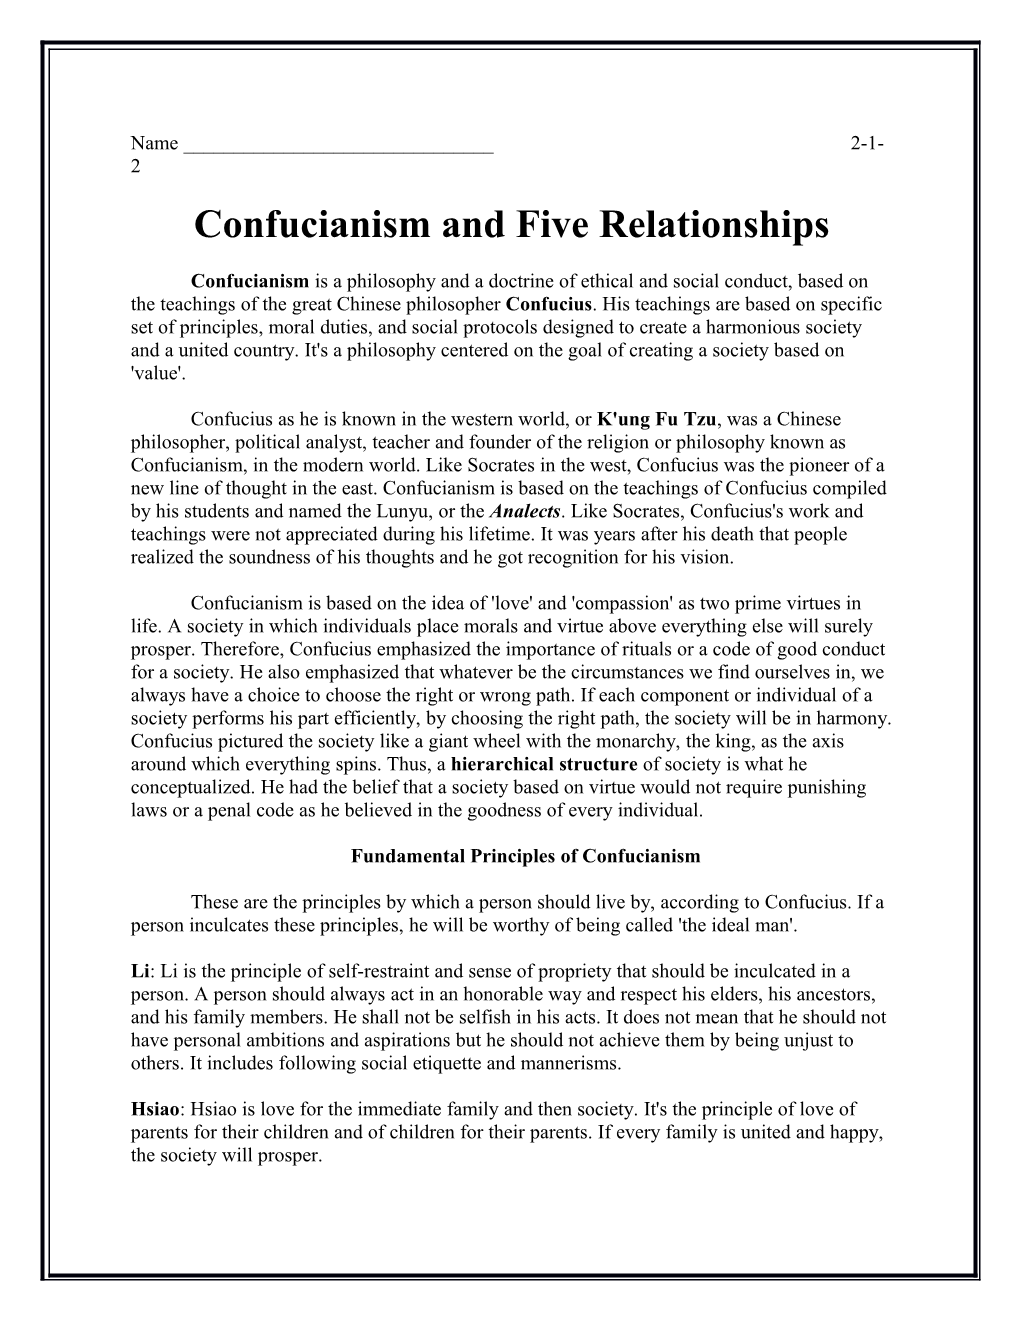 Confucianism and Five Relationships